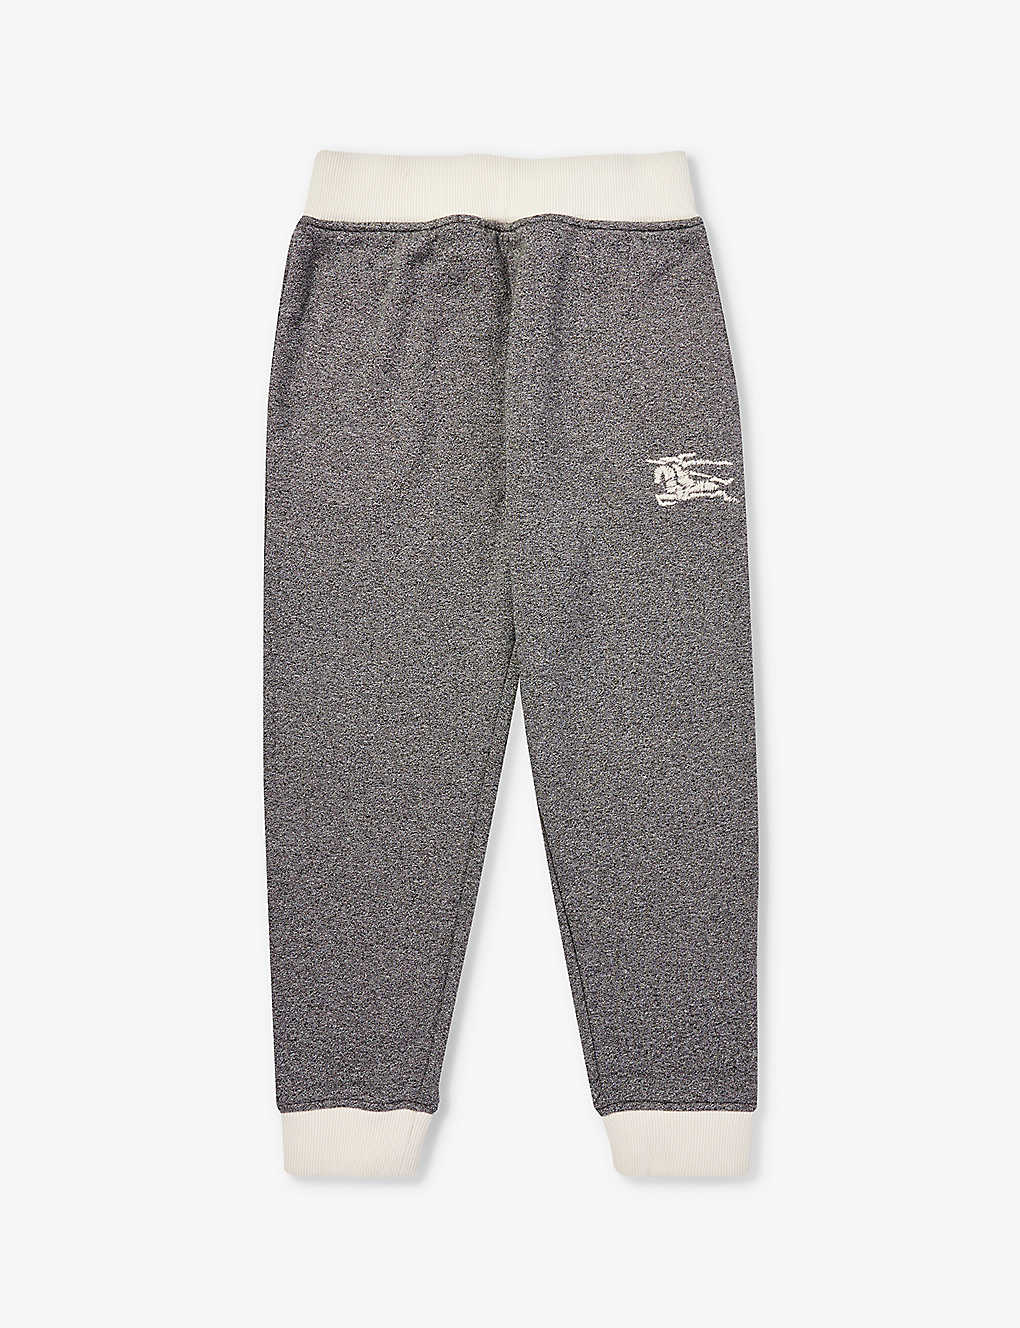 Shop Burberry Boys Charcoal Grey Melang Kids Sidney Brand-embroidered Cotton-jersey Jogging Bottoms 4-14